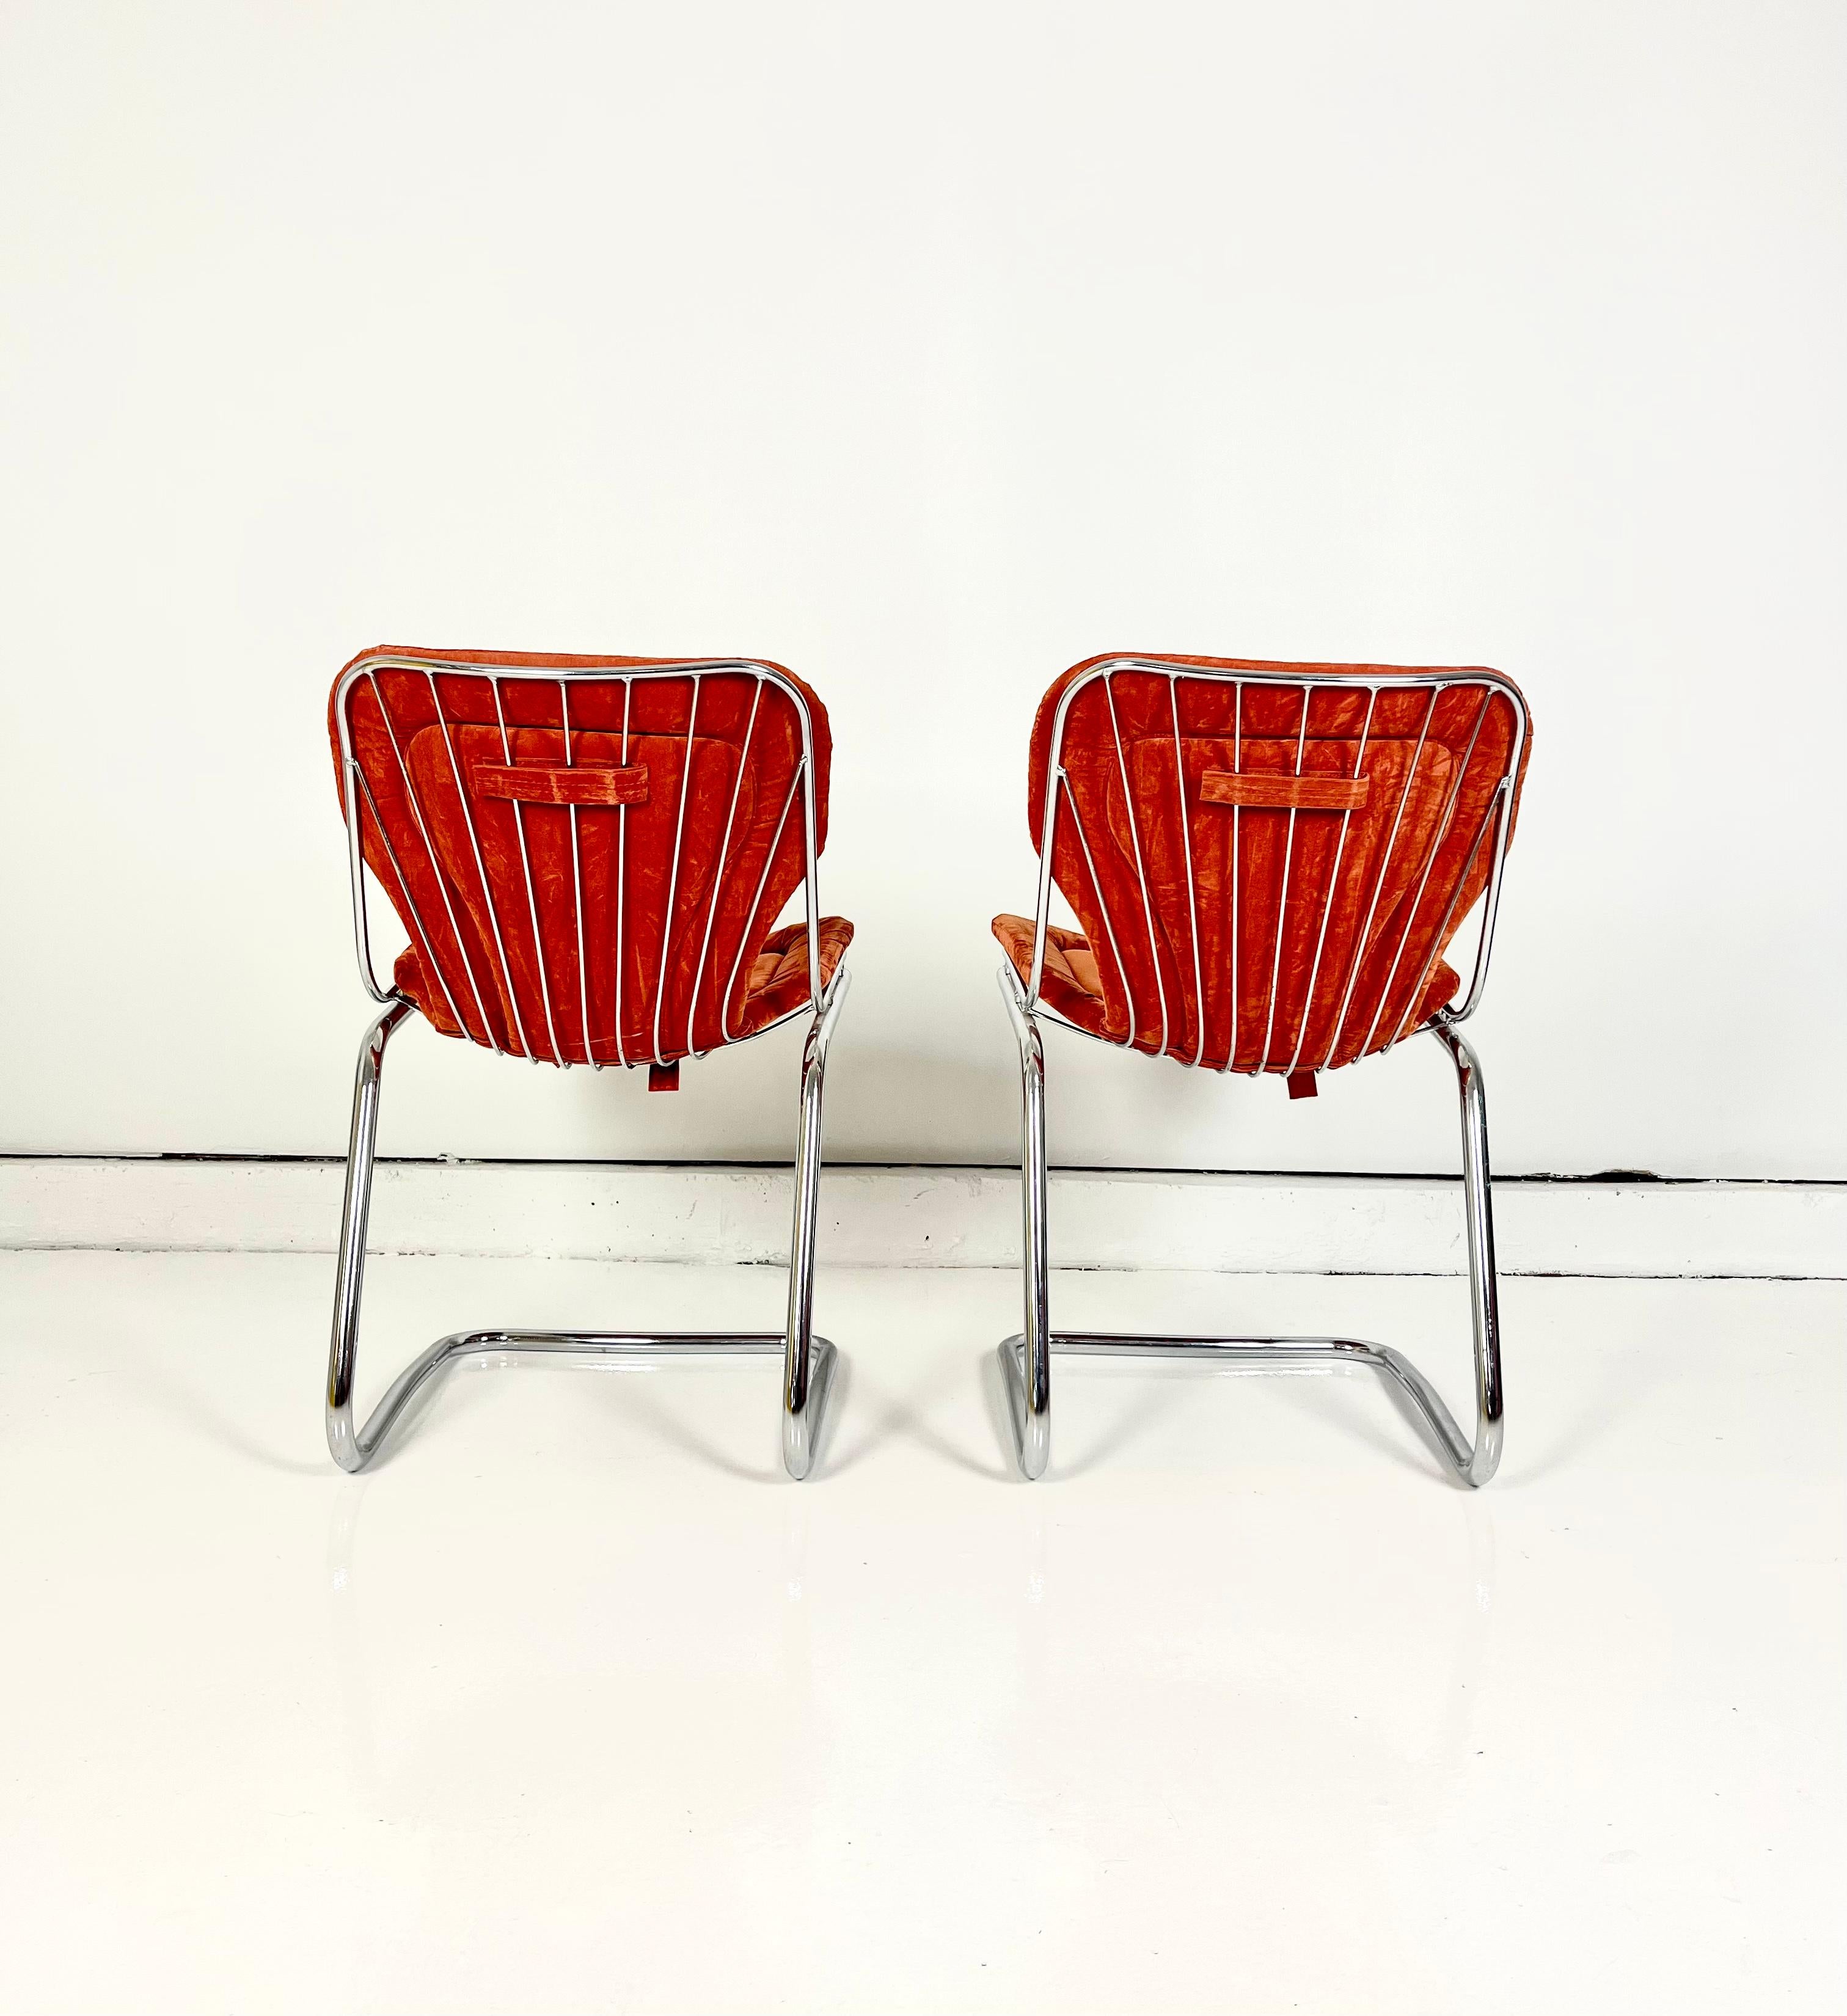 Space Age Pair of Dining Chairs Gastone Rinaldi, Rima Italy, 1970s (2 pairs available)